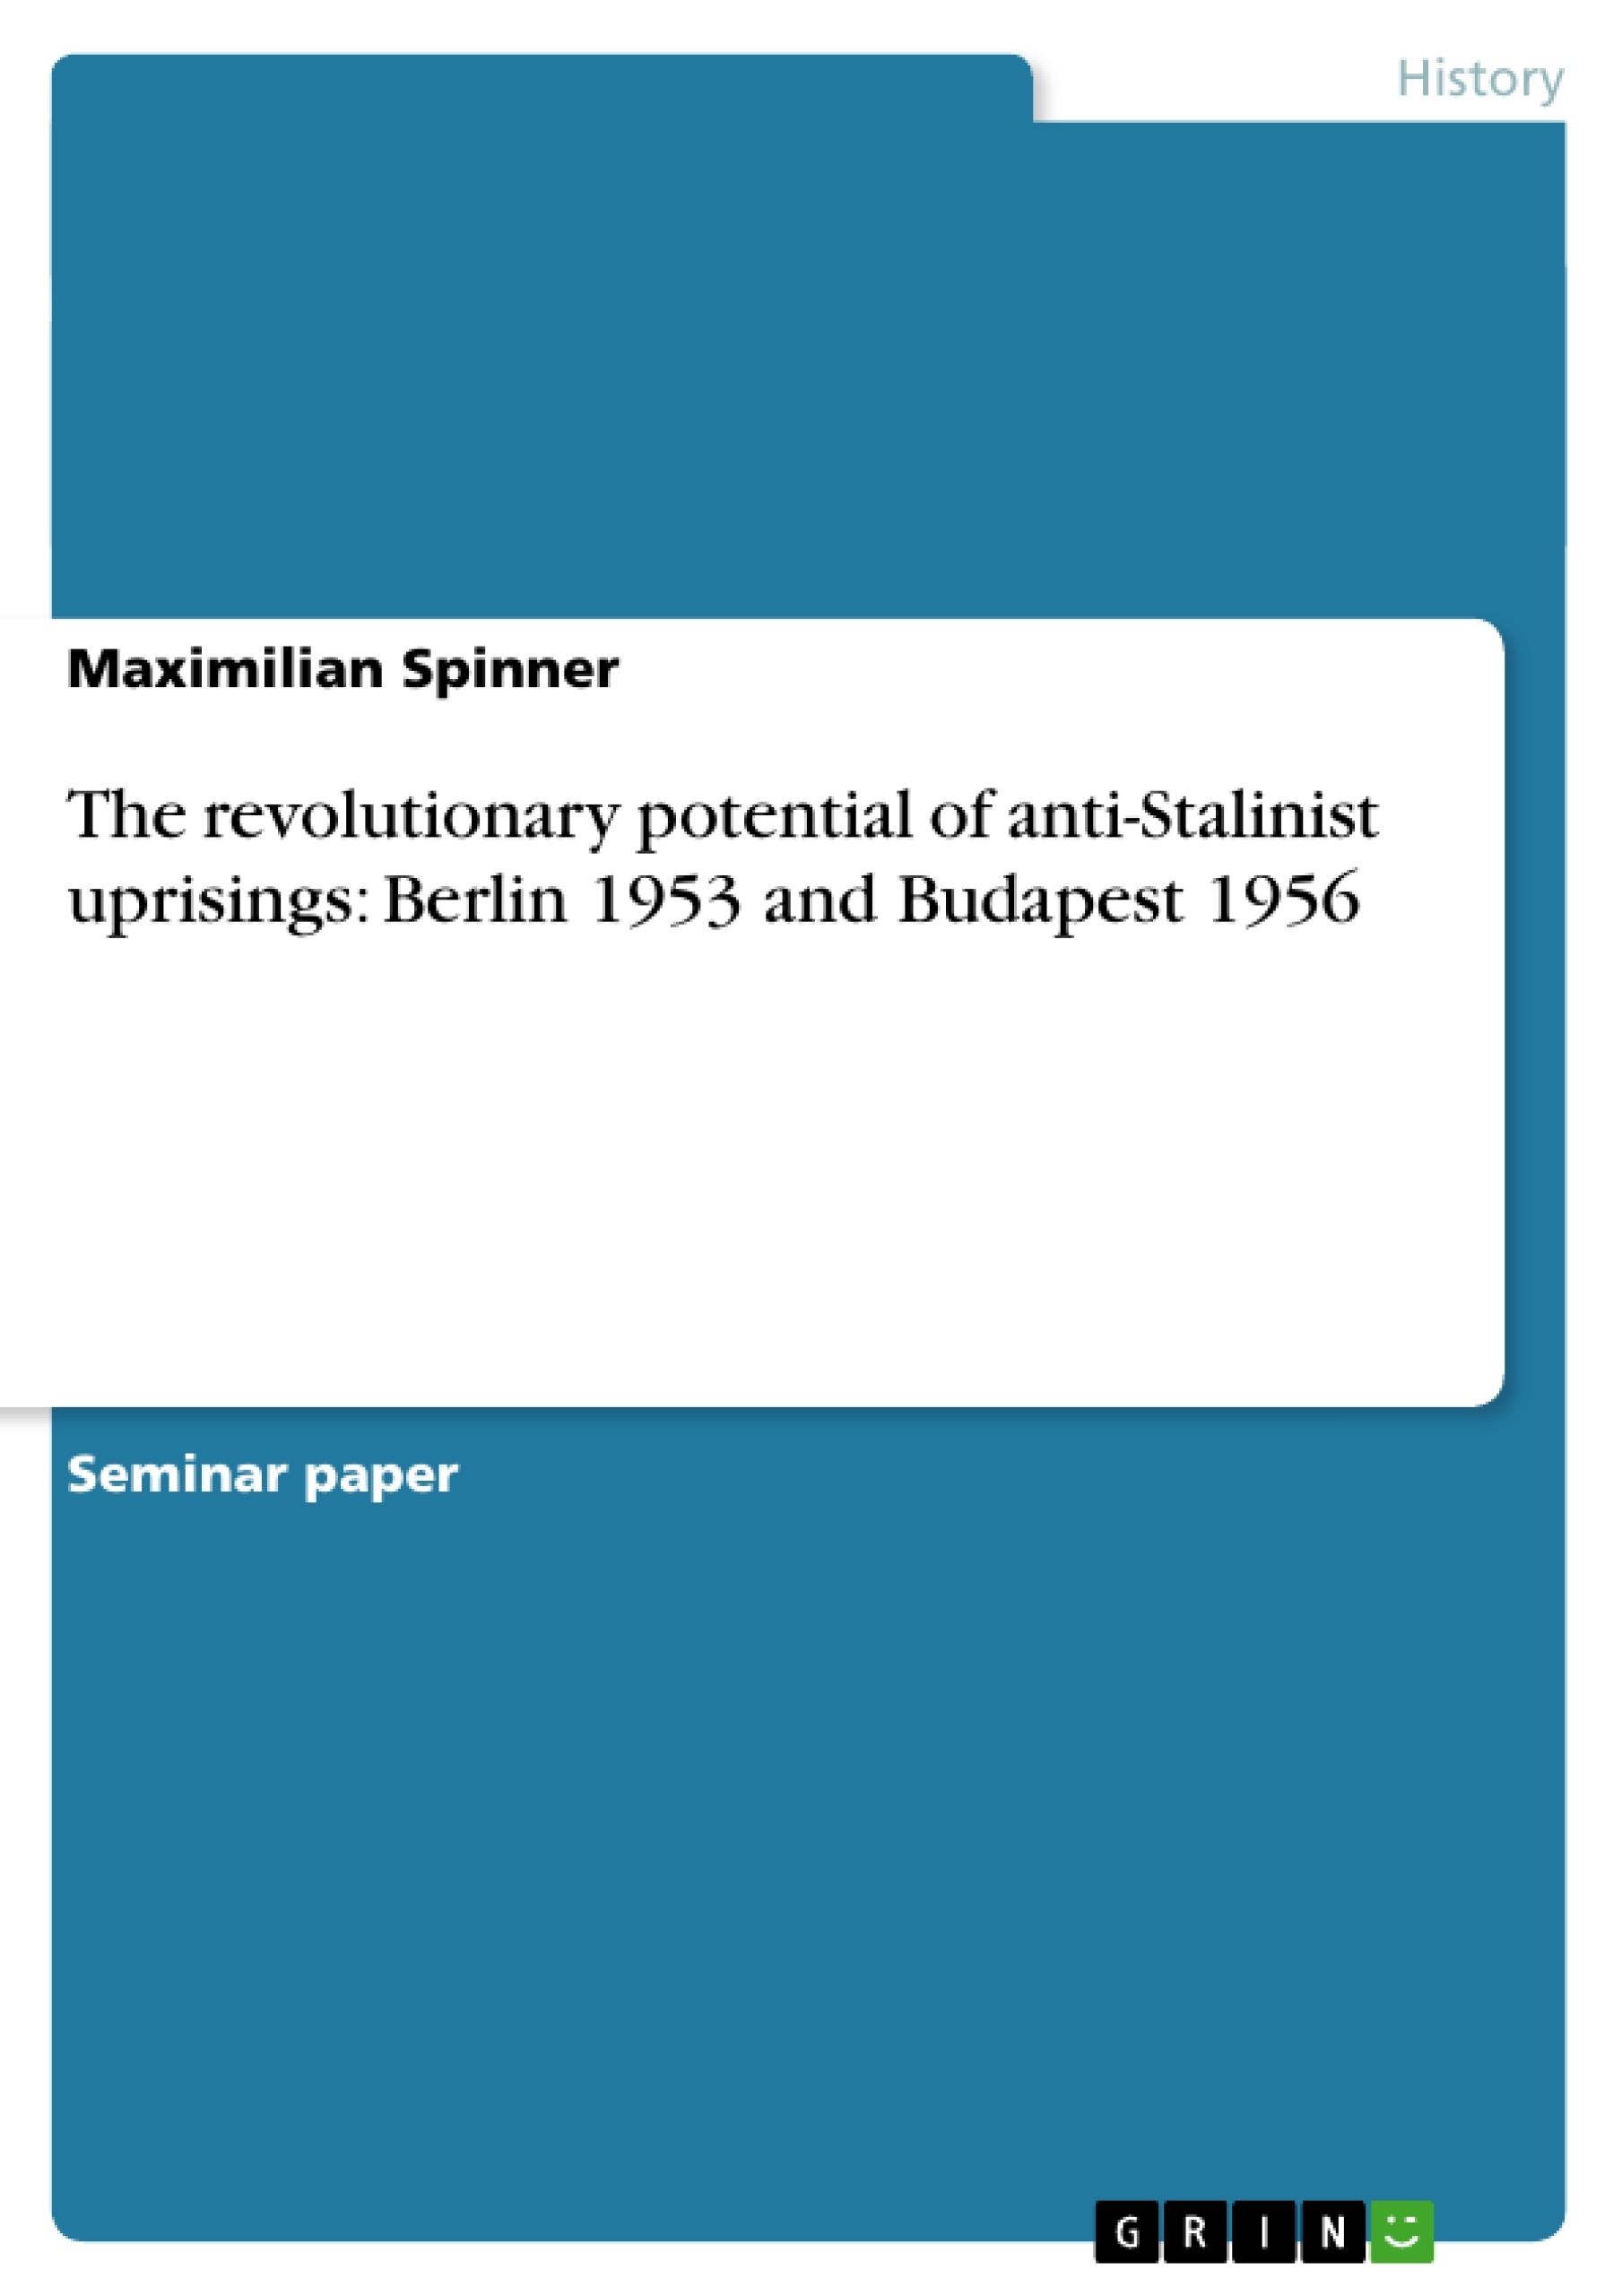 Titre: The revolutionary potential of anti-Stalinist uprisings: Berlin 1953 and Budapest 1956